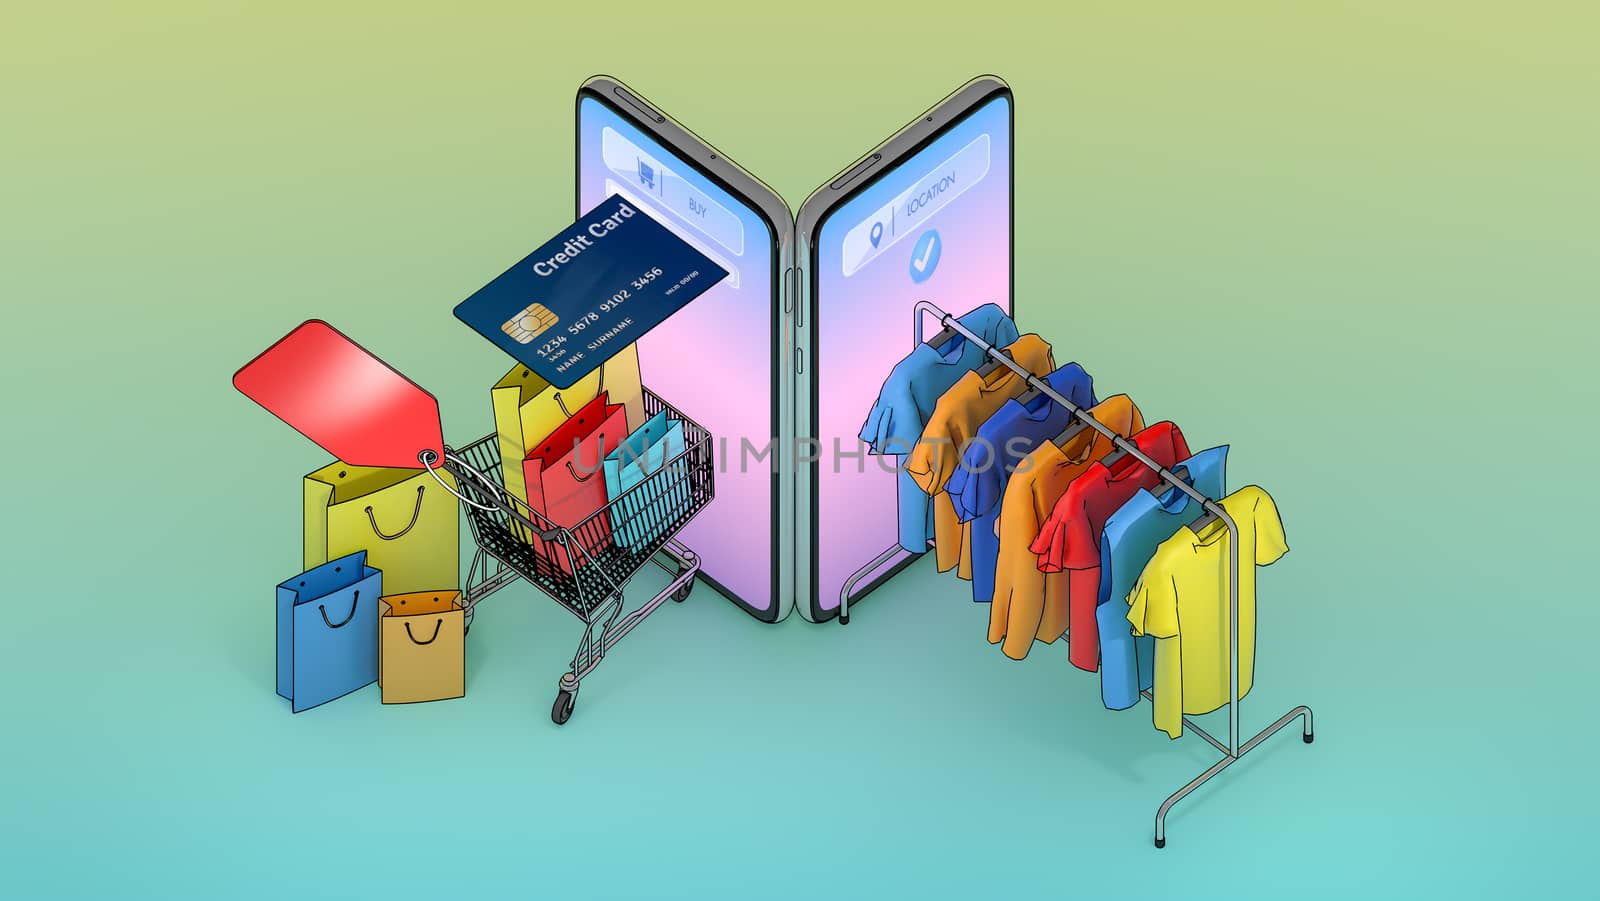 Many Shopping bag and price tag in a shopping cart and Clothes on a hanger appeared from smartphones screen., shopping online or shopaholic concept.,3d illustration with object clipping path.